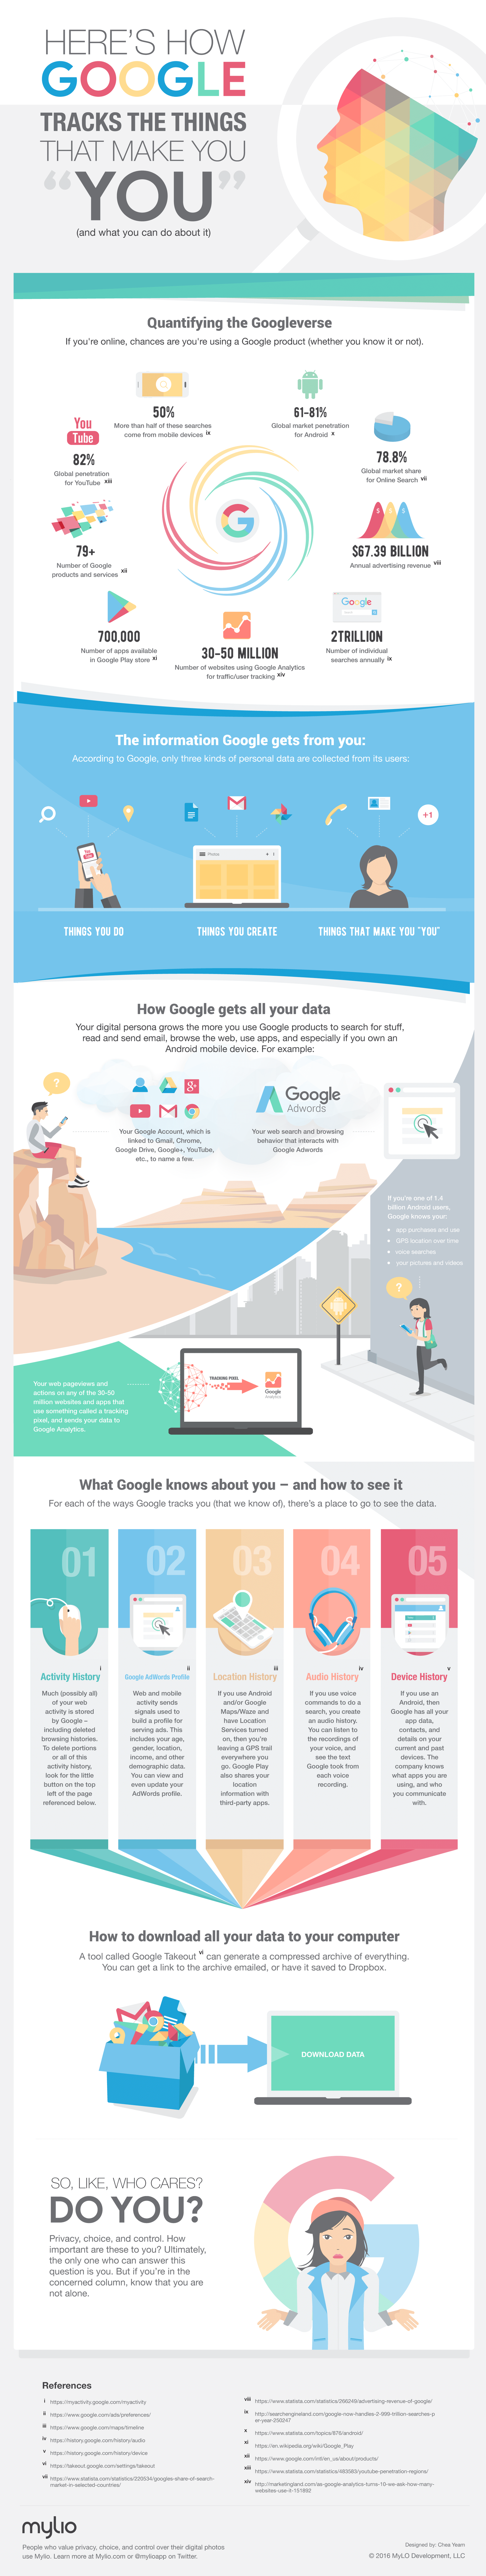 How Google Tracks You - And What You Can Do About It